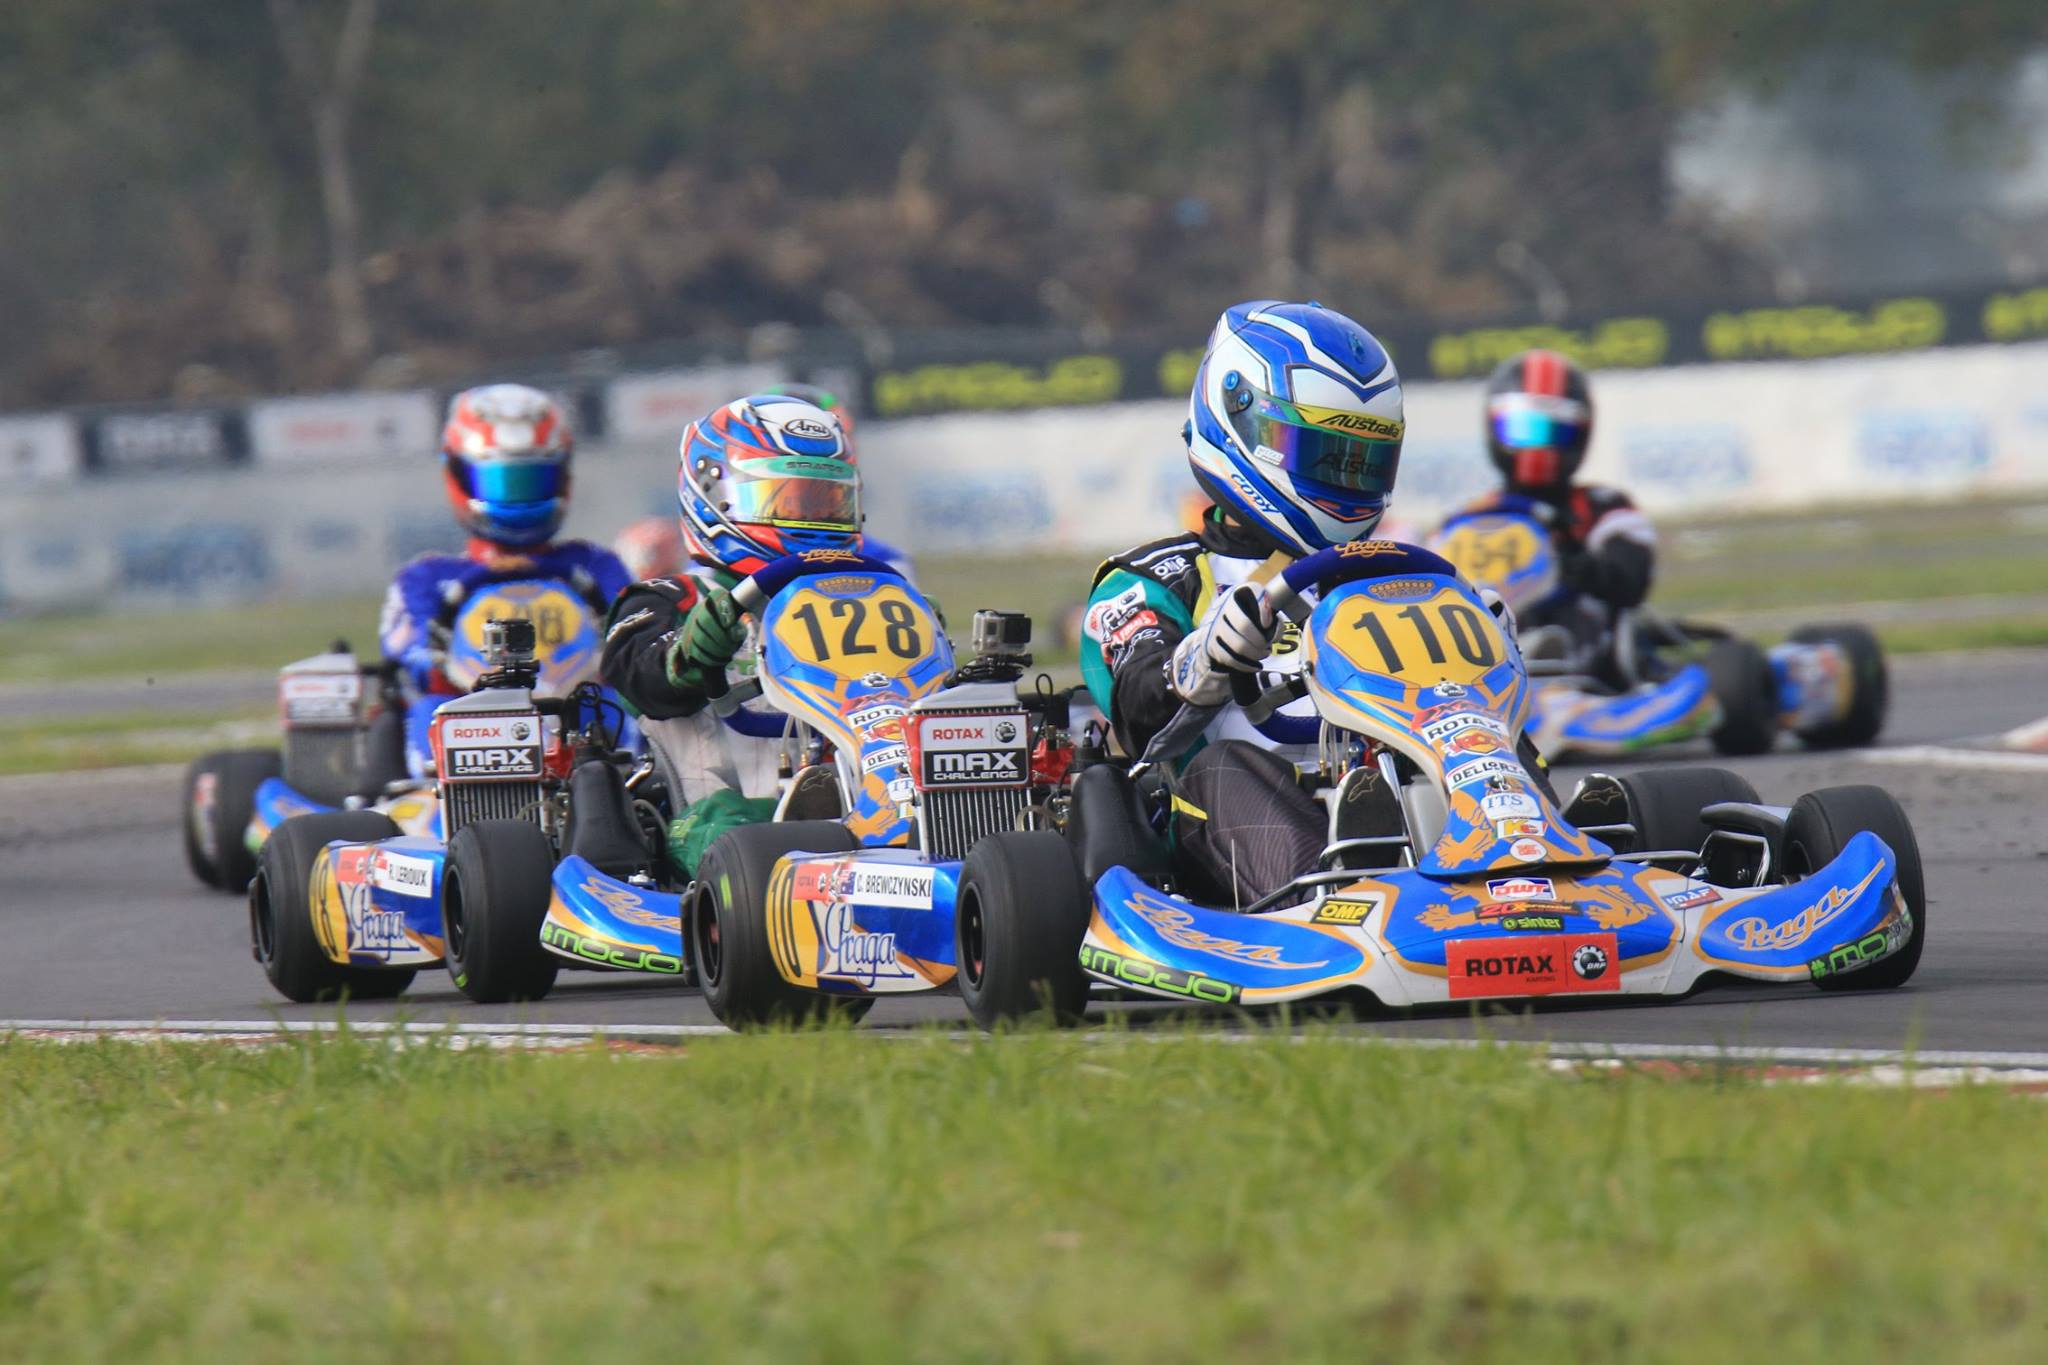 LIVESTREAM FROM THE ROTAX GRAND FINALS